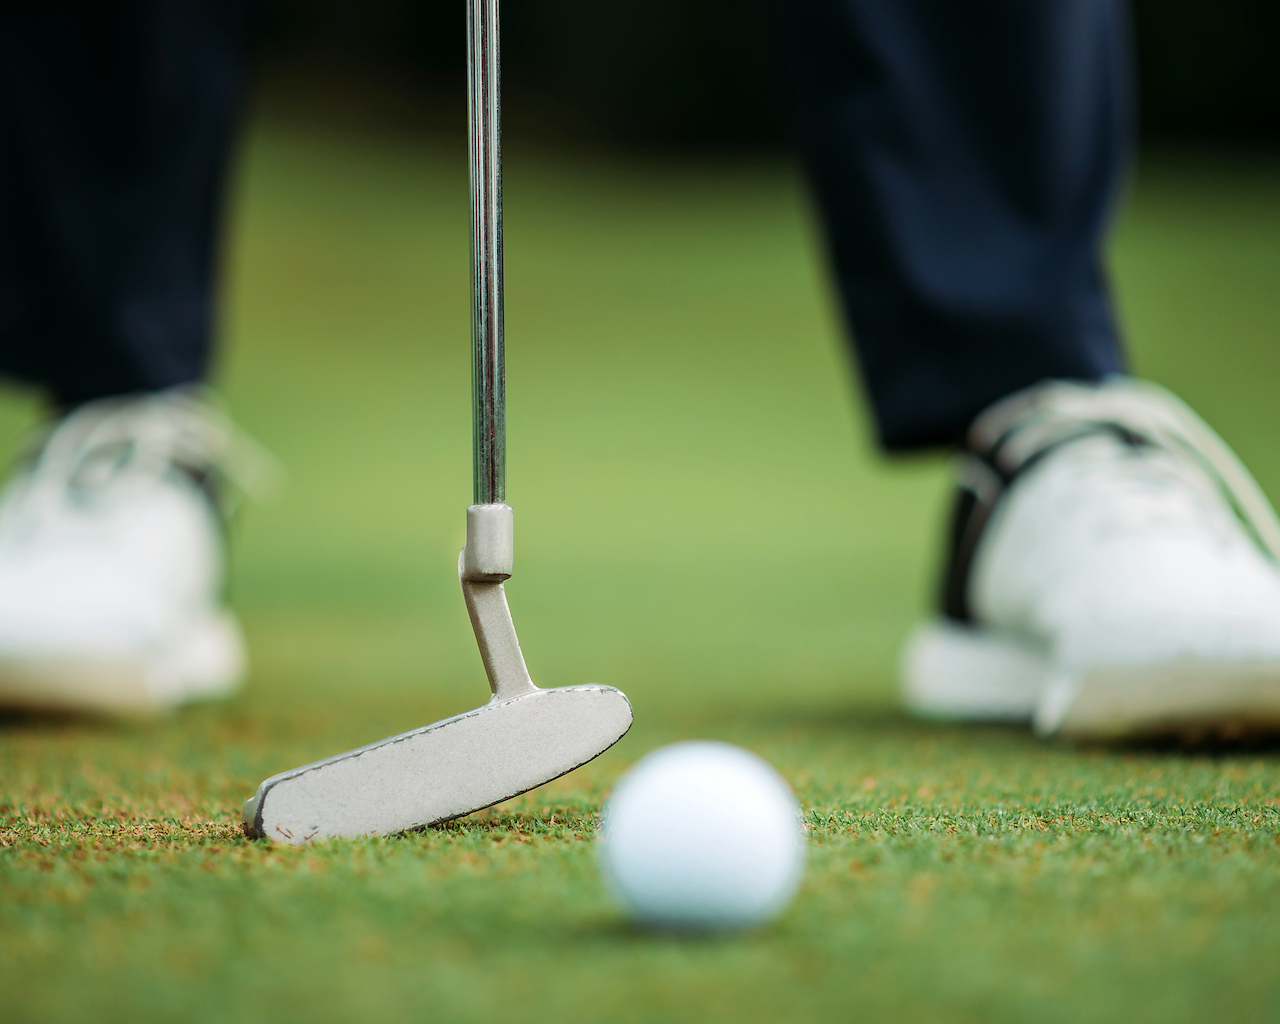 golfers feet with putter and ball